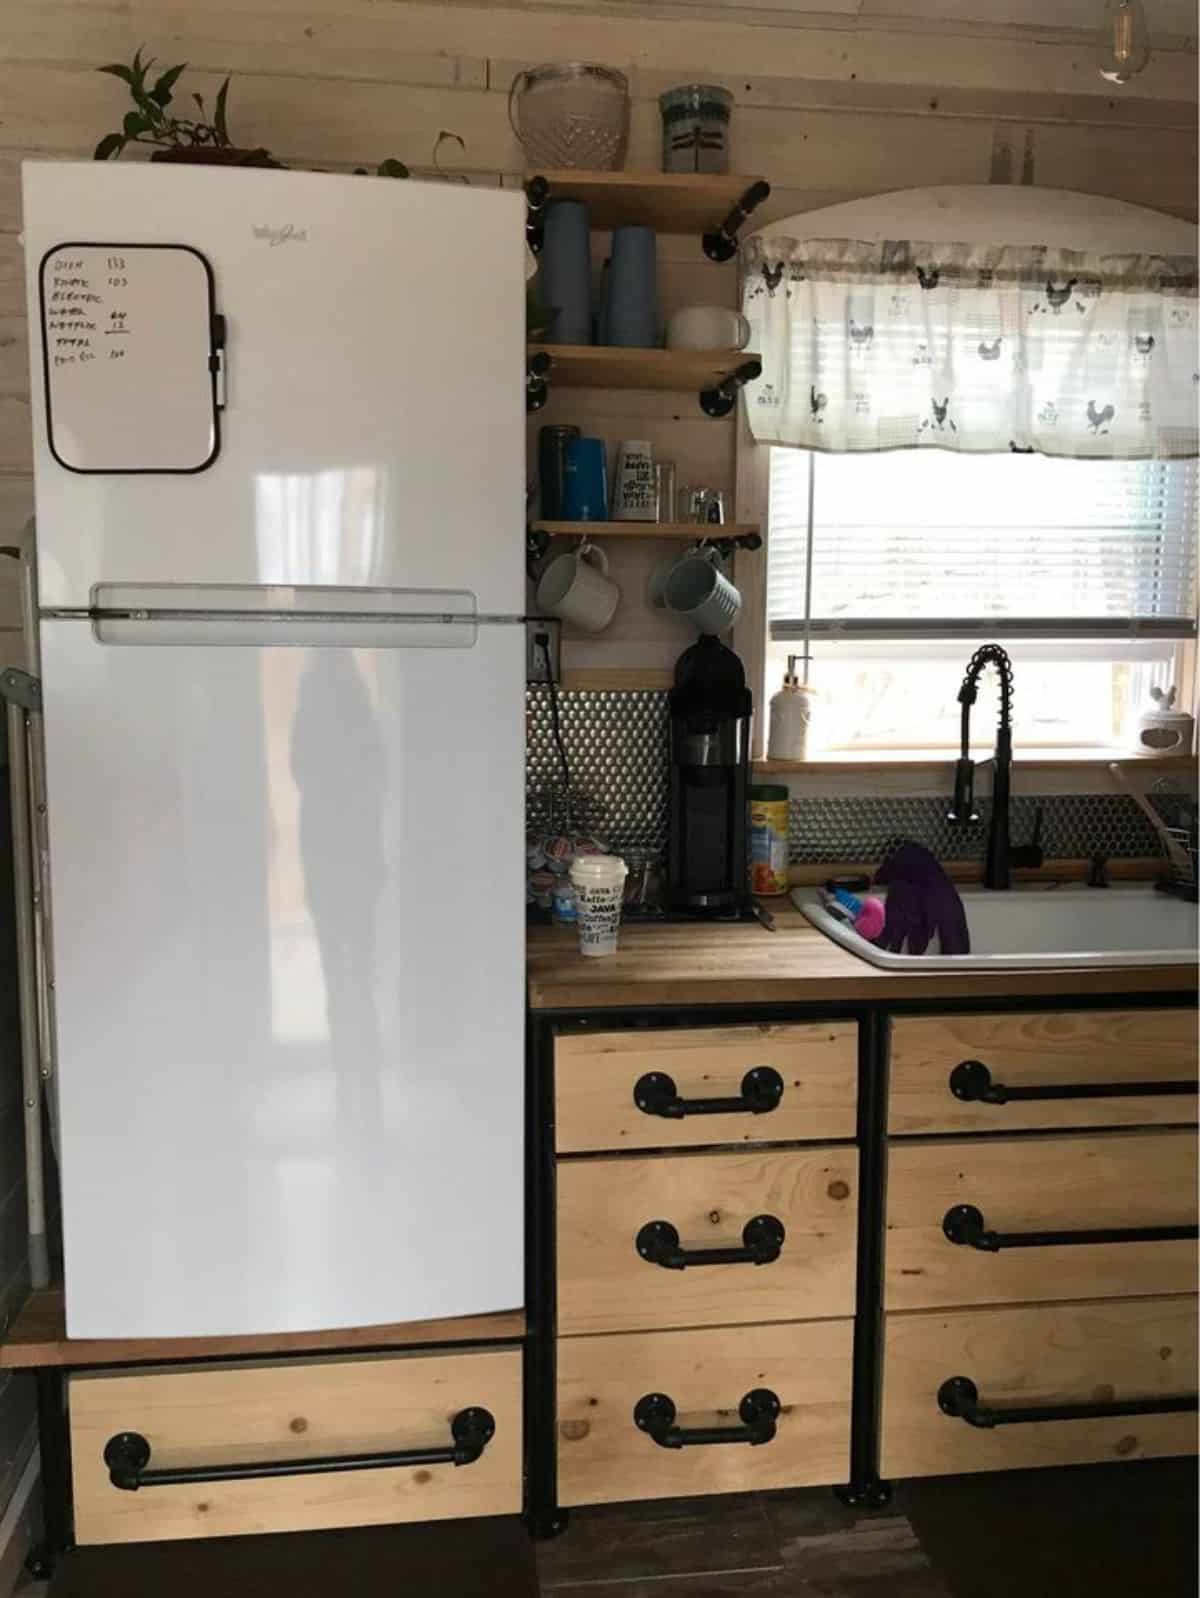 Double door refrigerator is also included in the kitchen